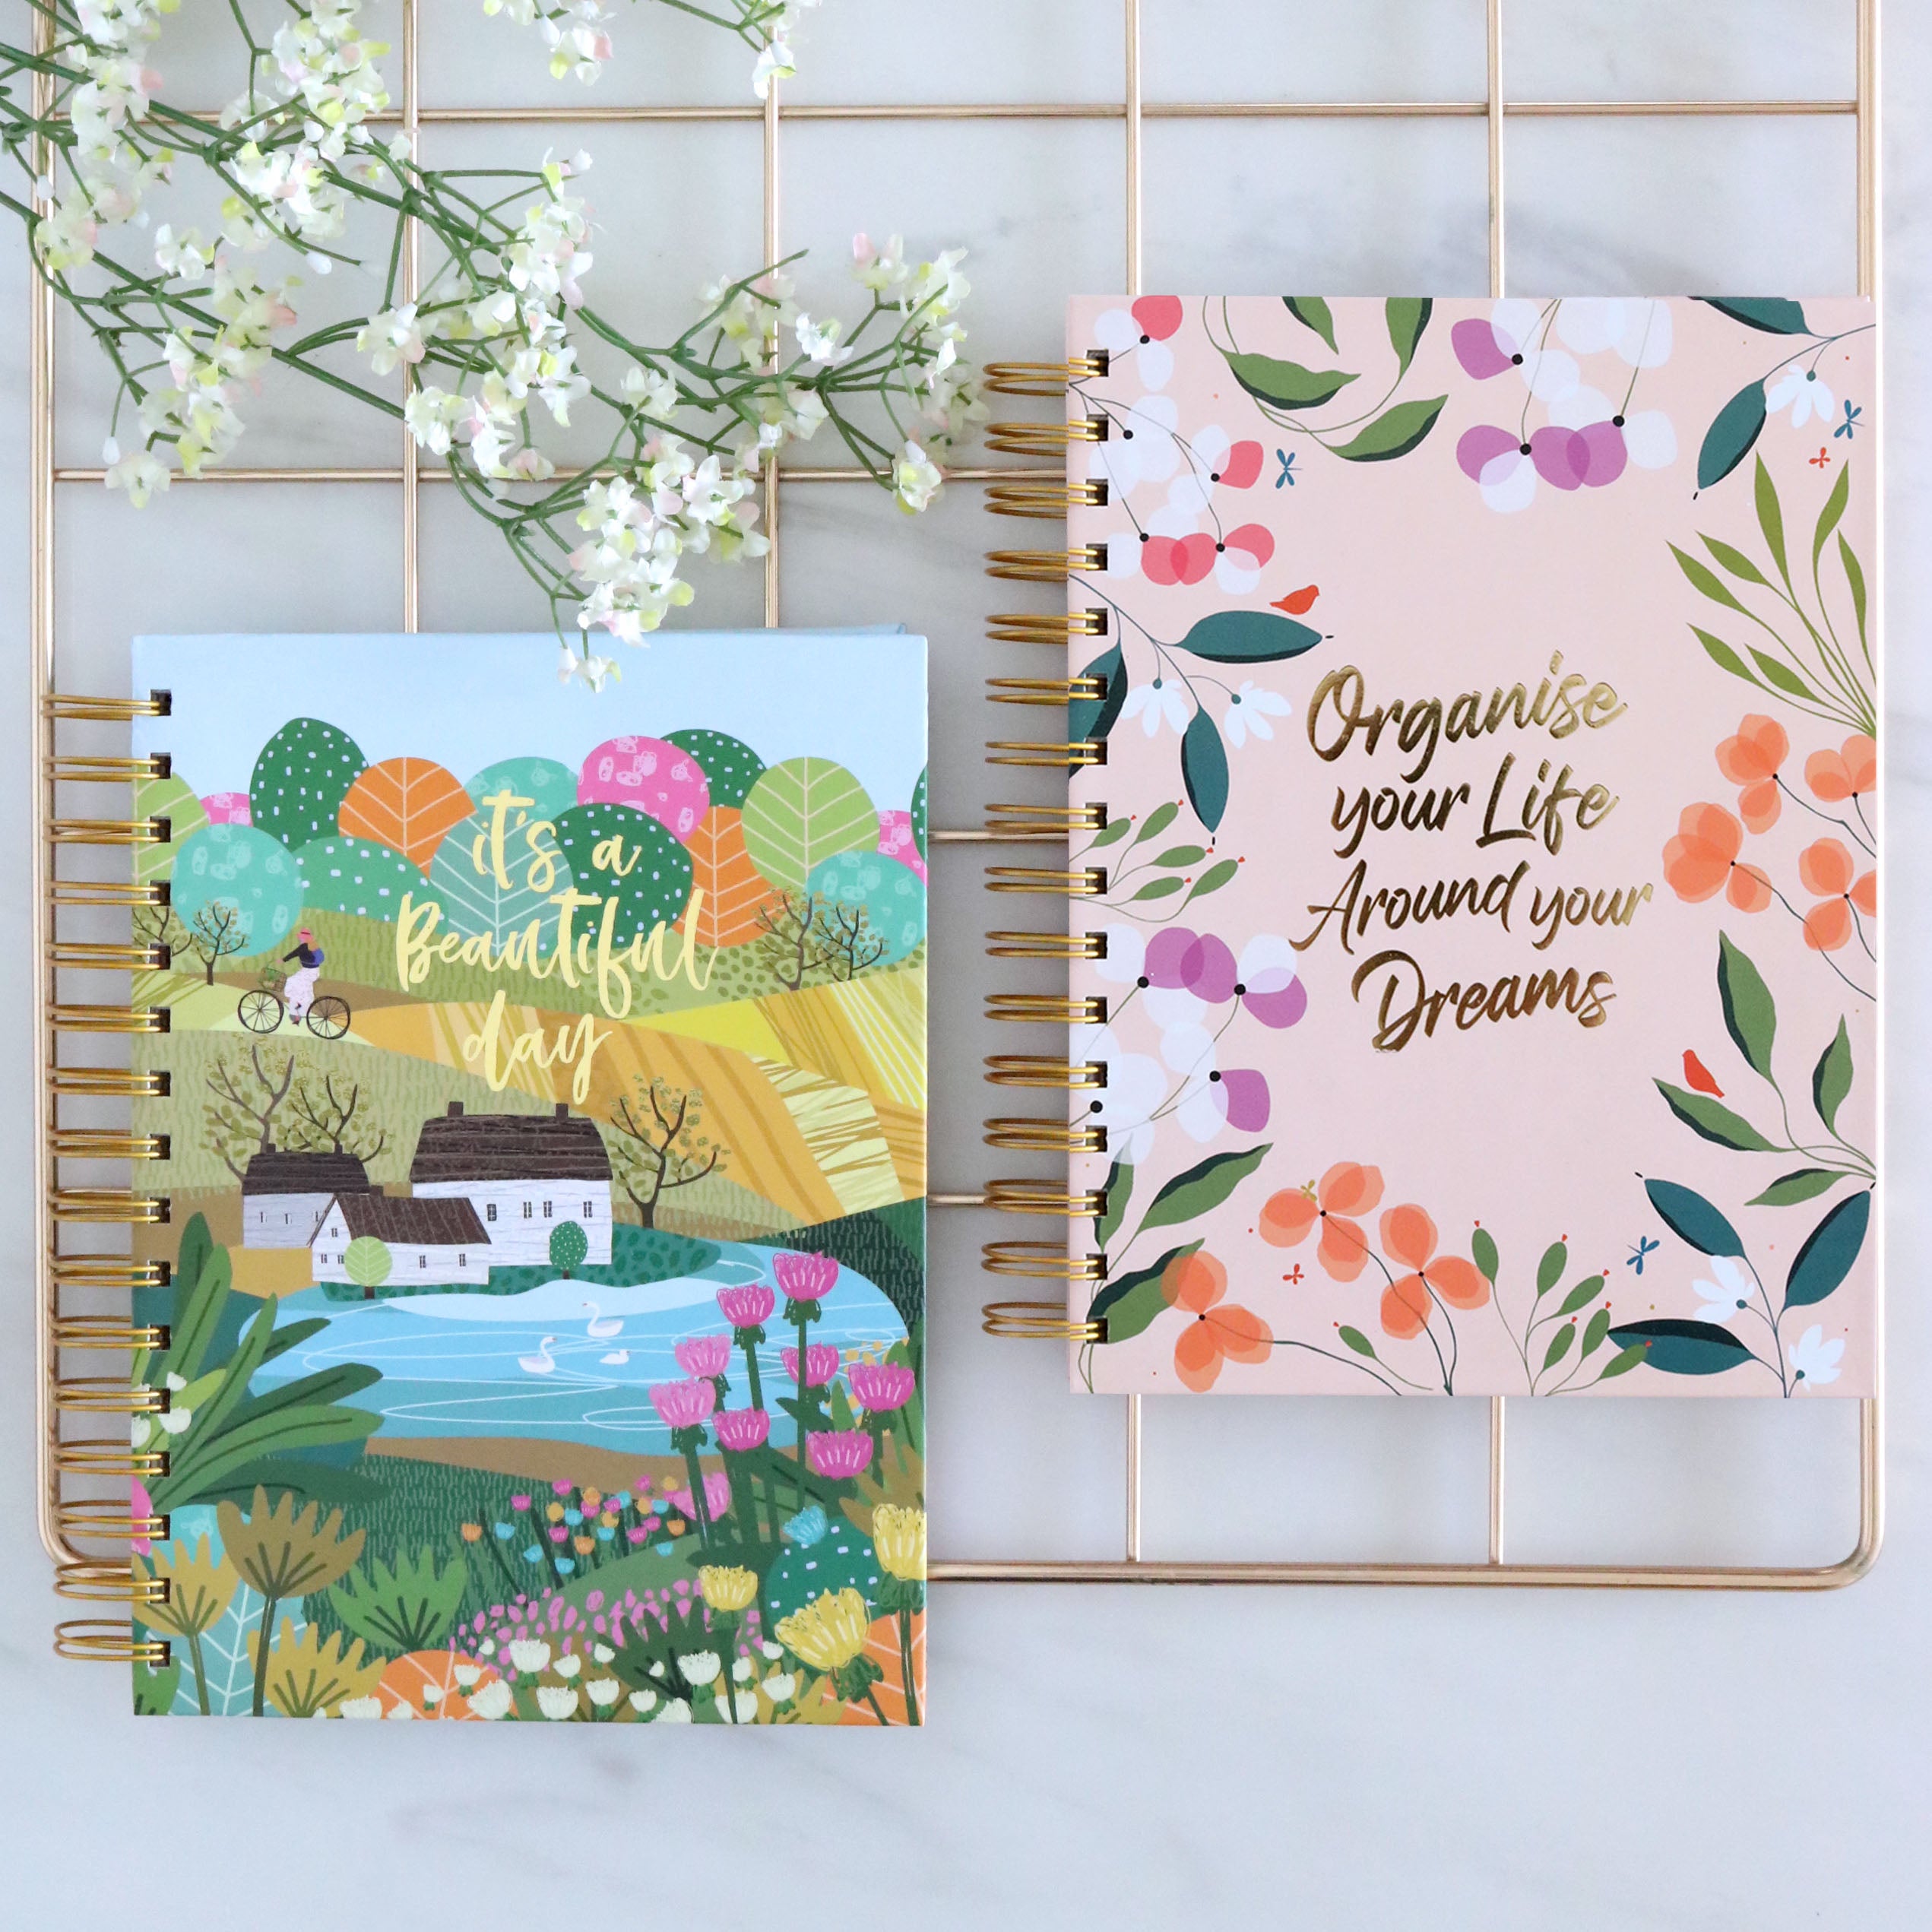 Set of 2 Undated Daily Planner - It’s a Beautiful Day & Organise Your Life